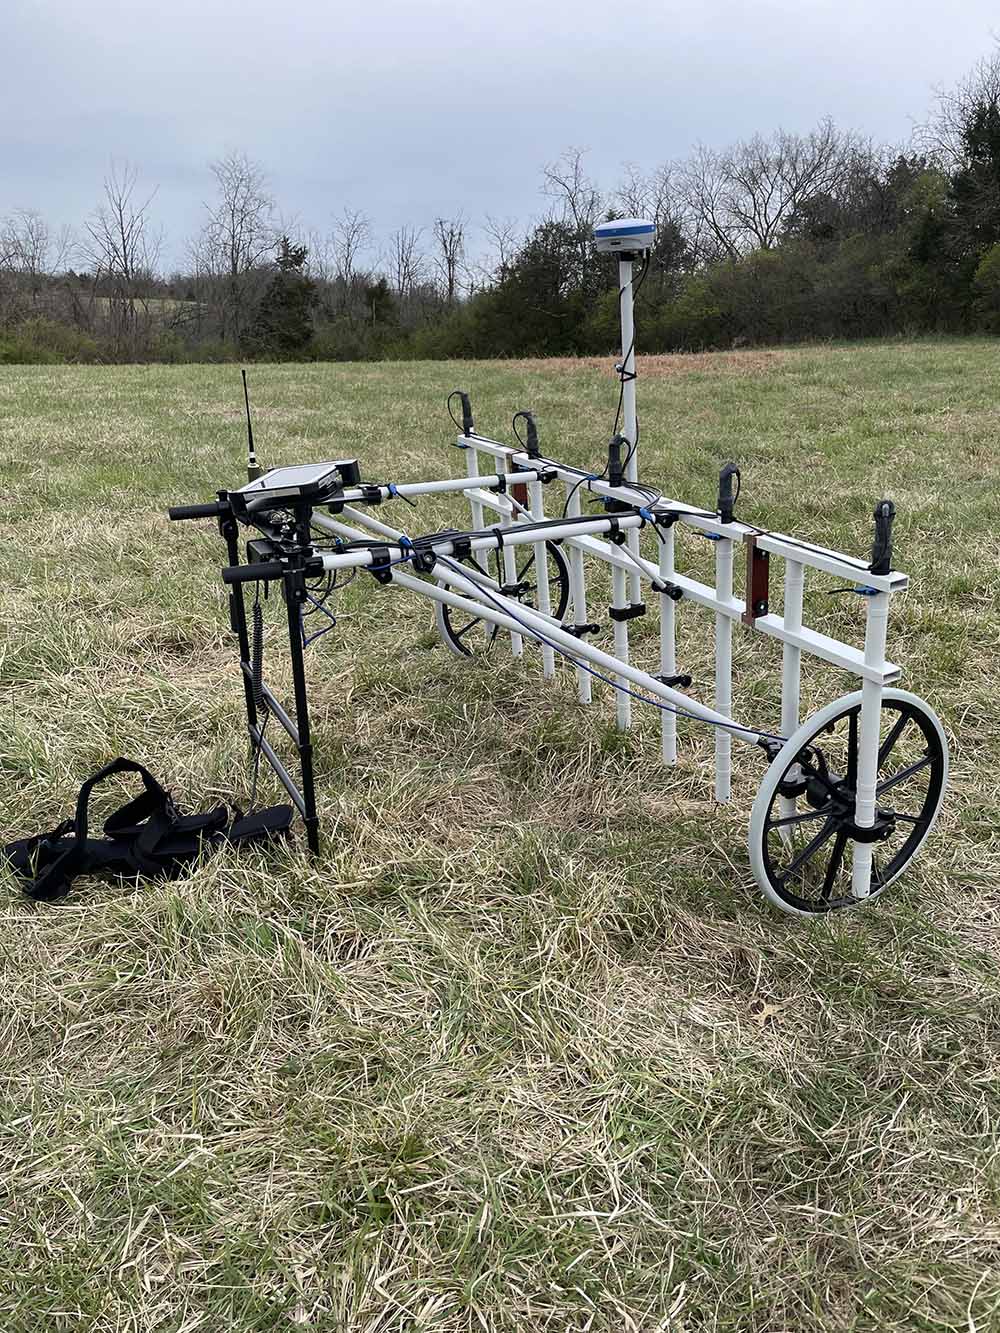 Pushcart magnetometer, a metallic white pole structure resting on two wheels, in open field.